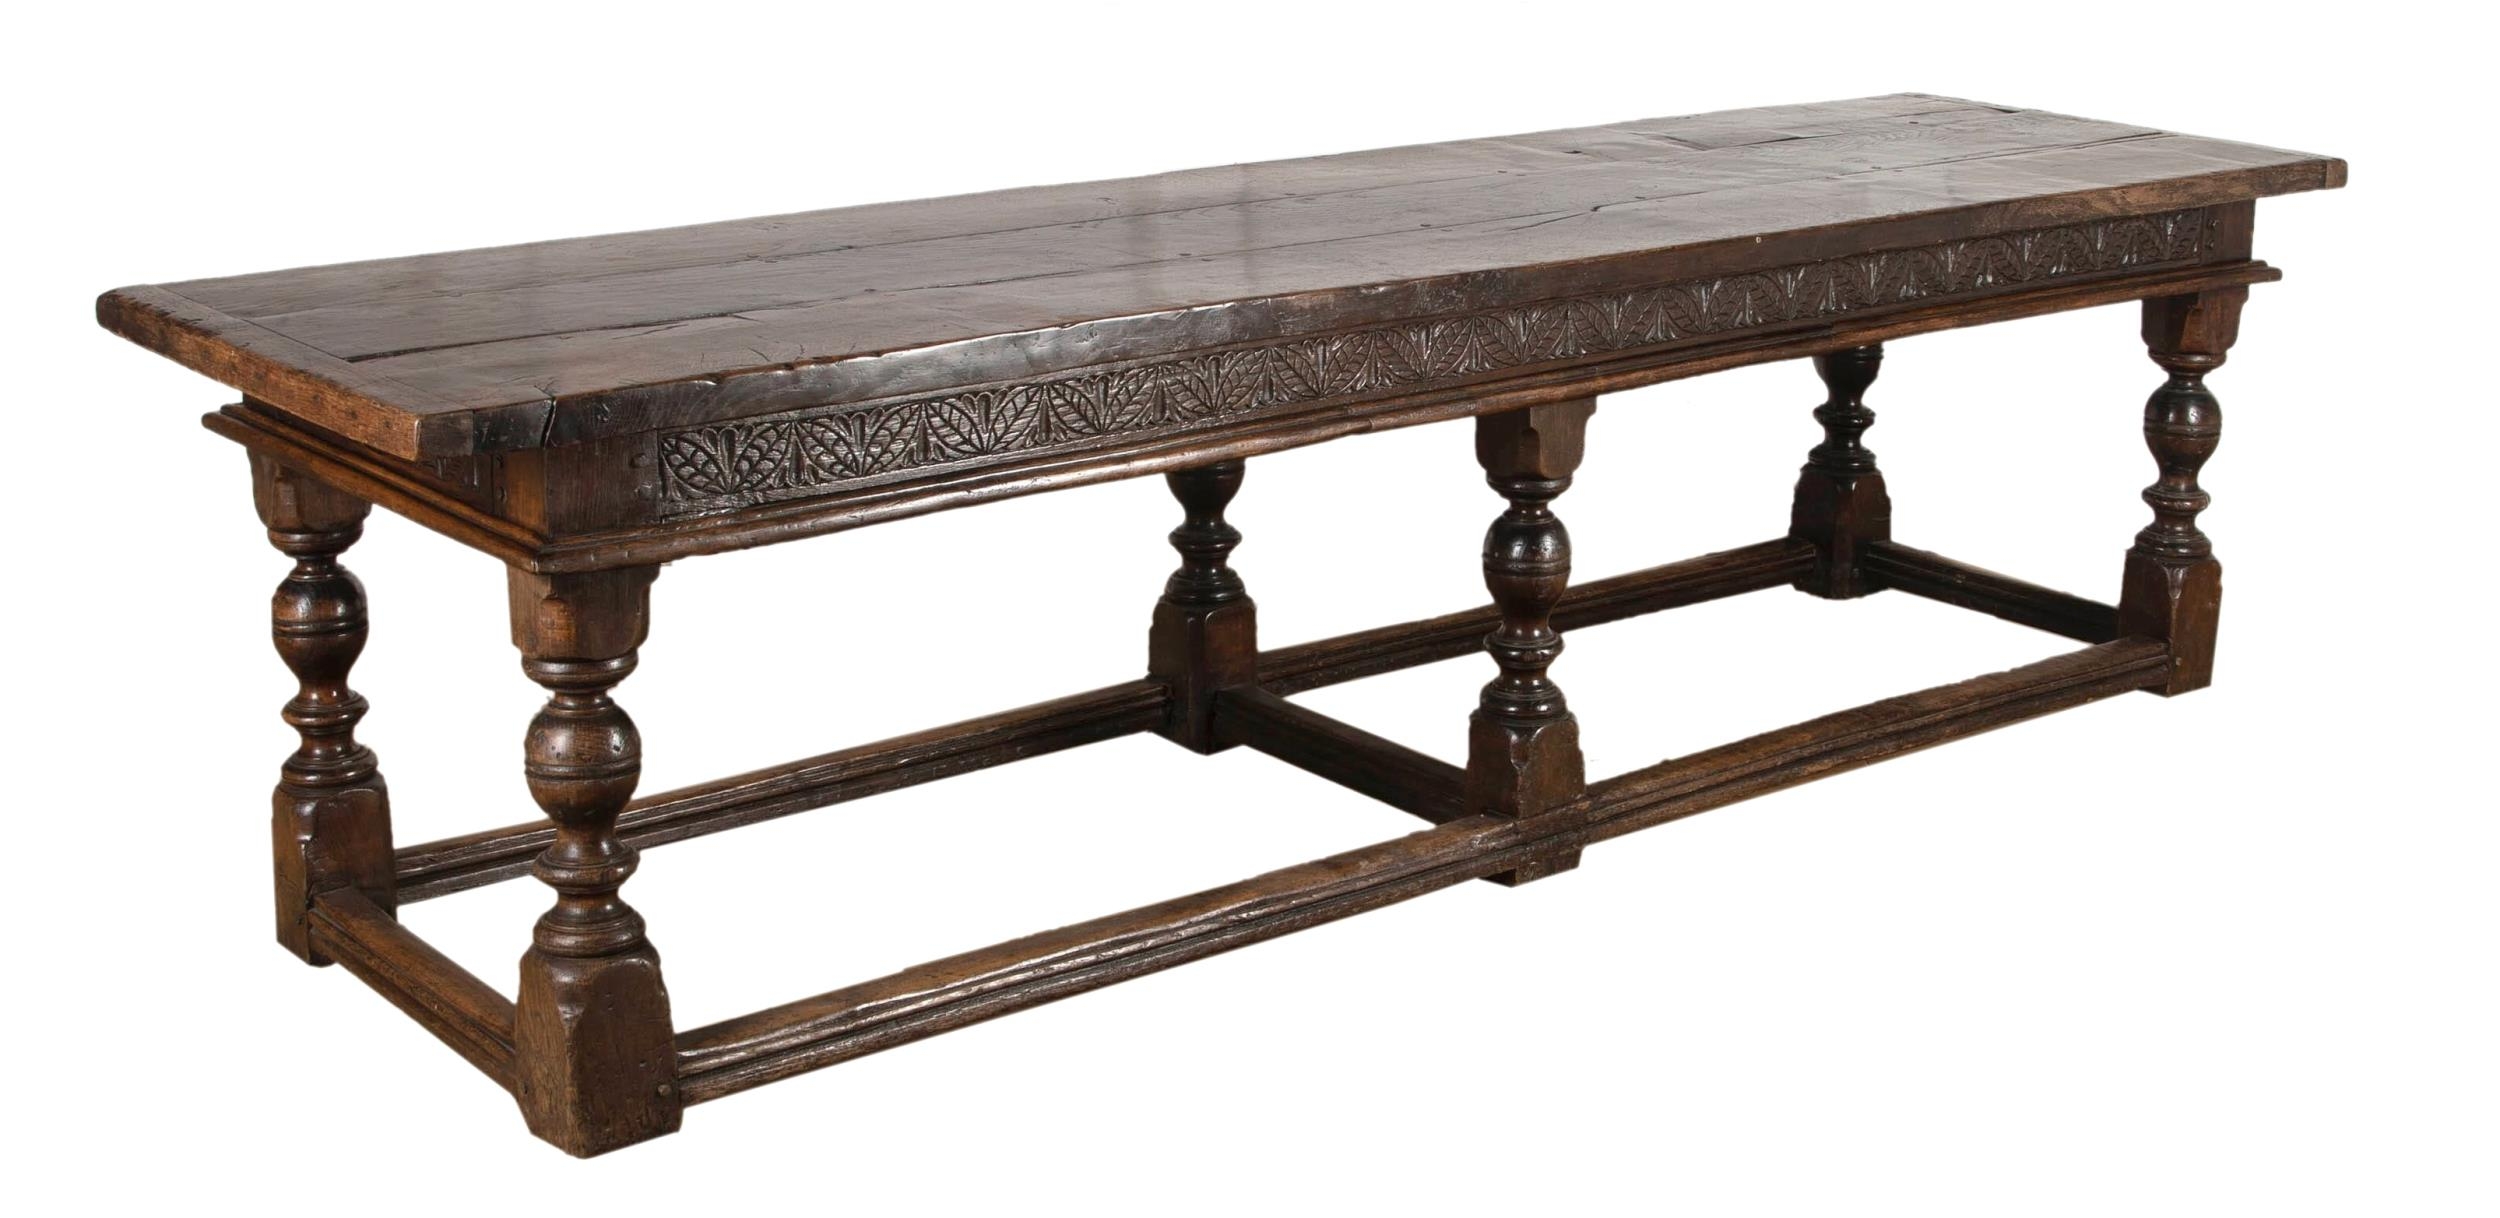 Impressive 17th century style refectory table, thick oak top over a carved floral frieze and six - Bild 4 aus 4